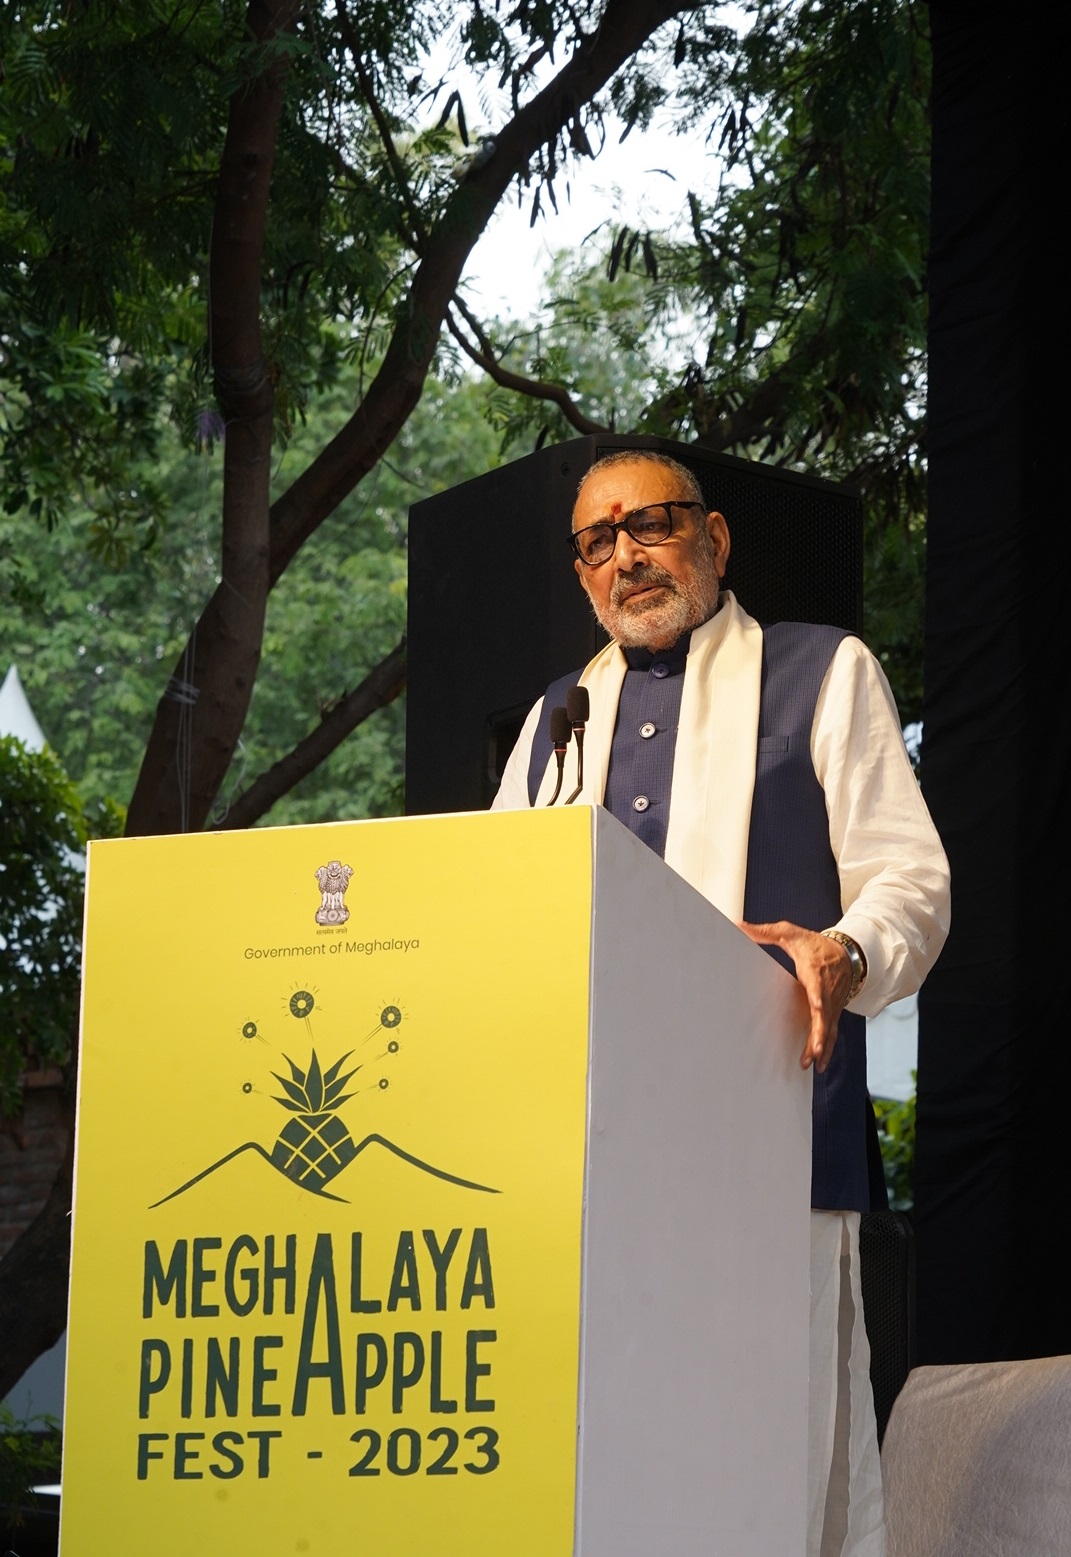 2023 Meghalaya Pineapple Festival inaugurated with splendor in New Delhi: A fusion of culture, Agri excellence, and unity